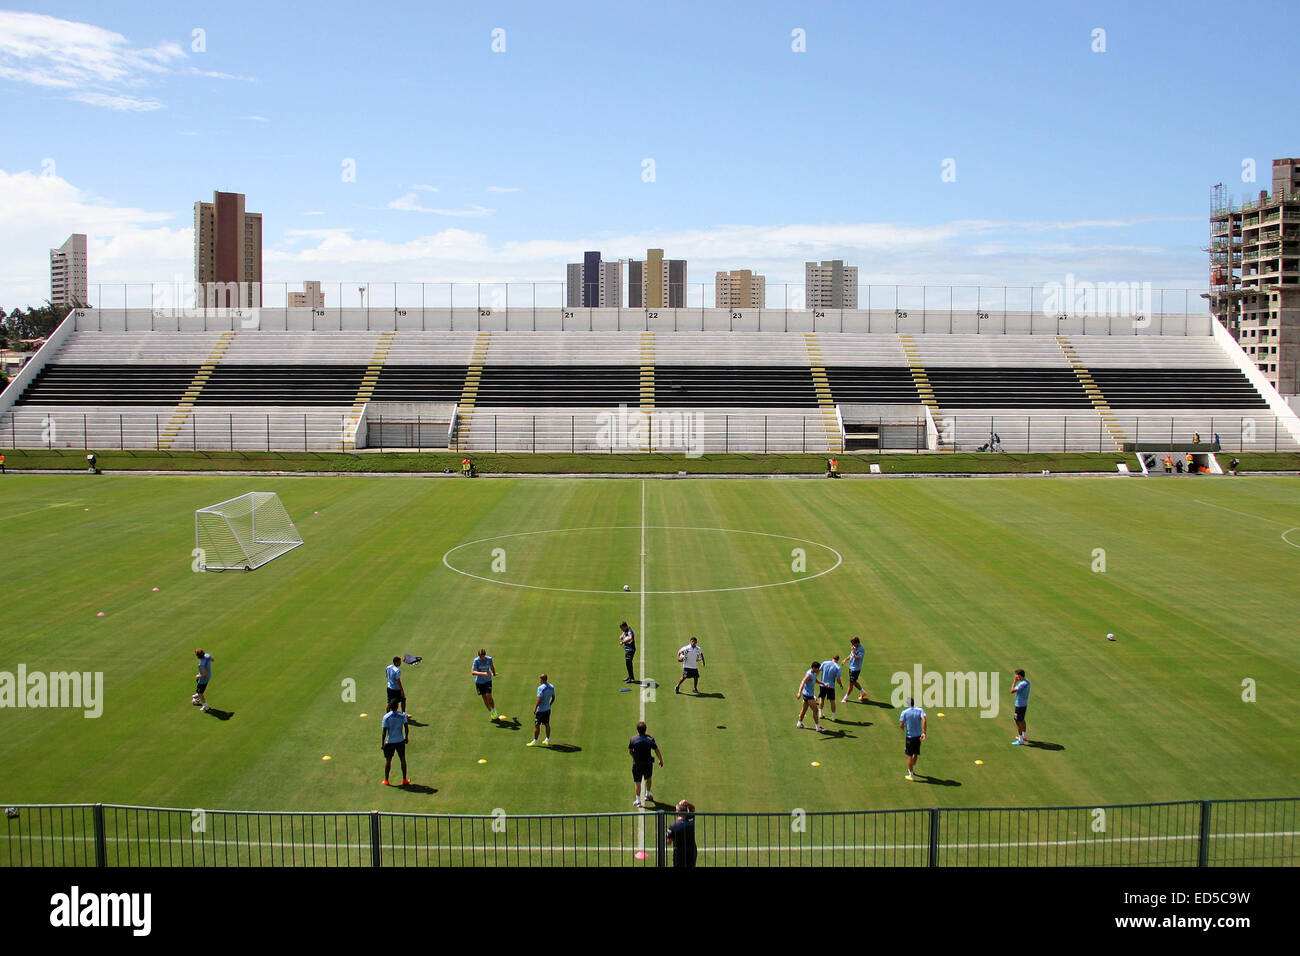 2014 FIFA World Cup - Uruguay national football team training held at Frasqueirao Stadium, following their win against Italy yesterday (24Jun14).  Where: Natal, Brazil When: 25 Jun 2014 Stock Photo